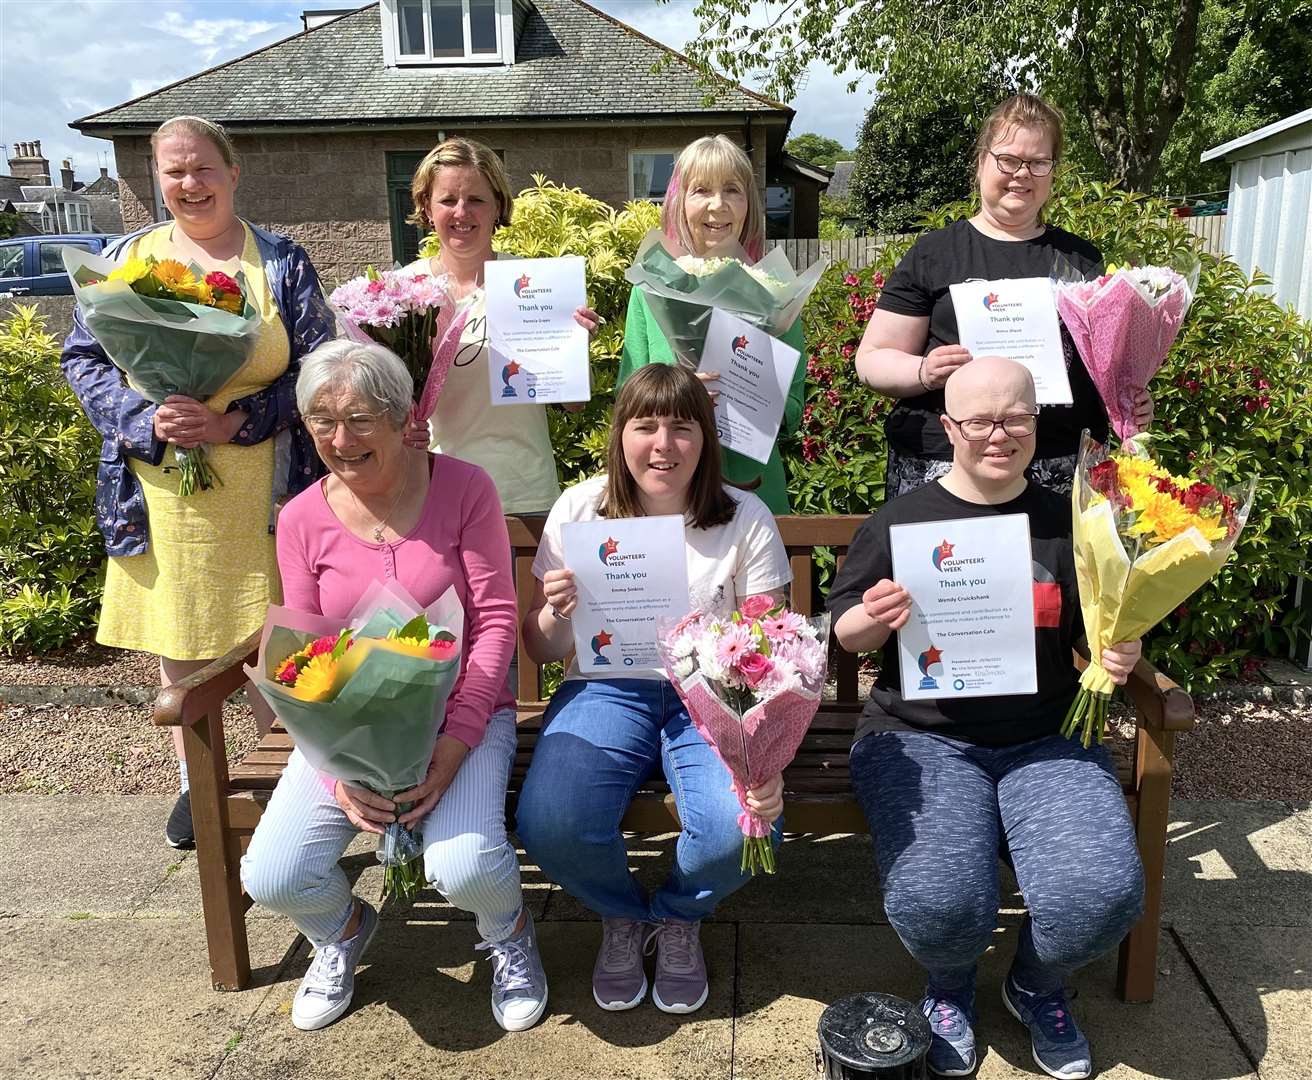 Aimee Shand, Emma Sinkins, Pam Green, Wendy Cruickshank, Helen McIntyre and Helen Henderson and Patsy Clark were presented with gifts in thanks for their volunteer work. Picture: Phil Harman